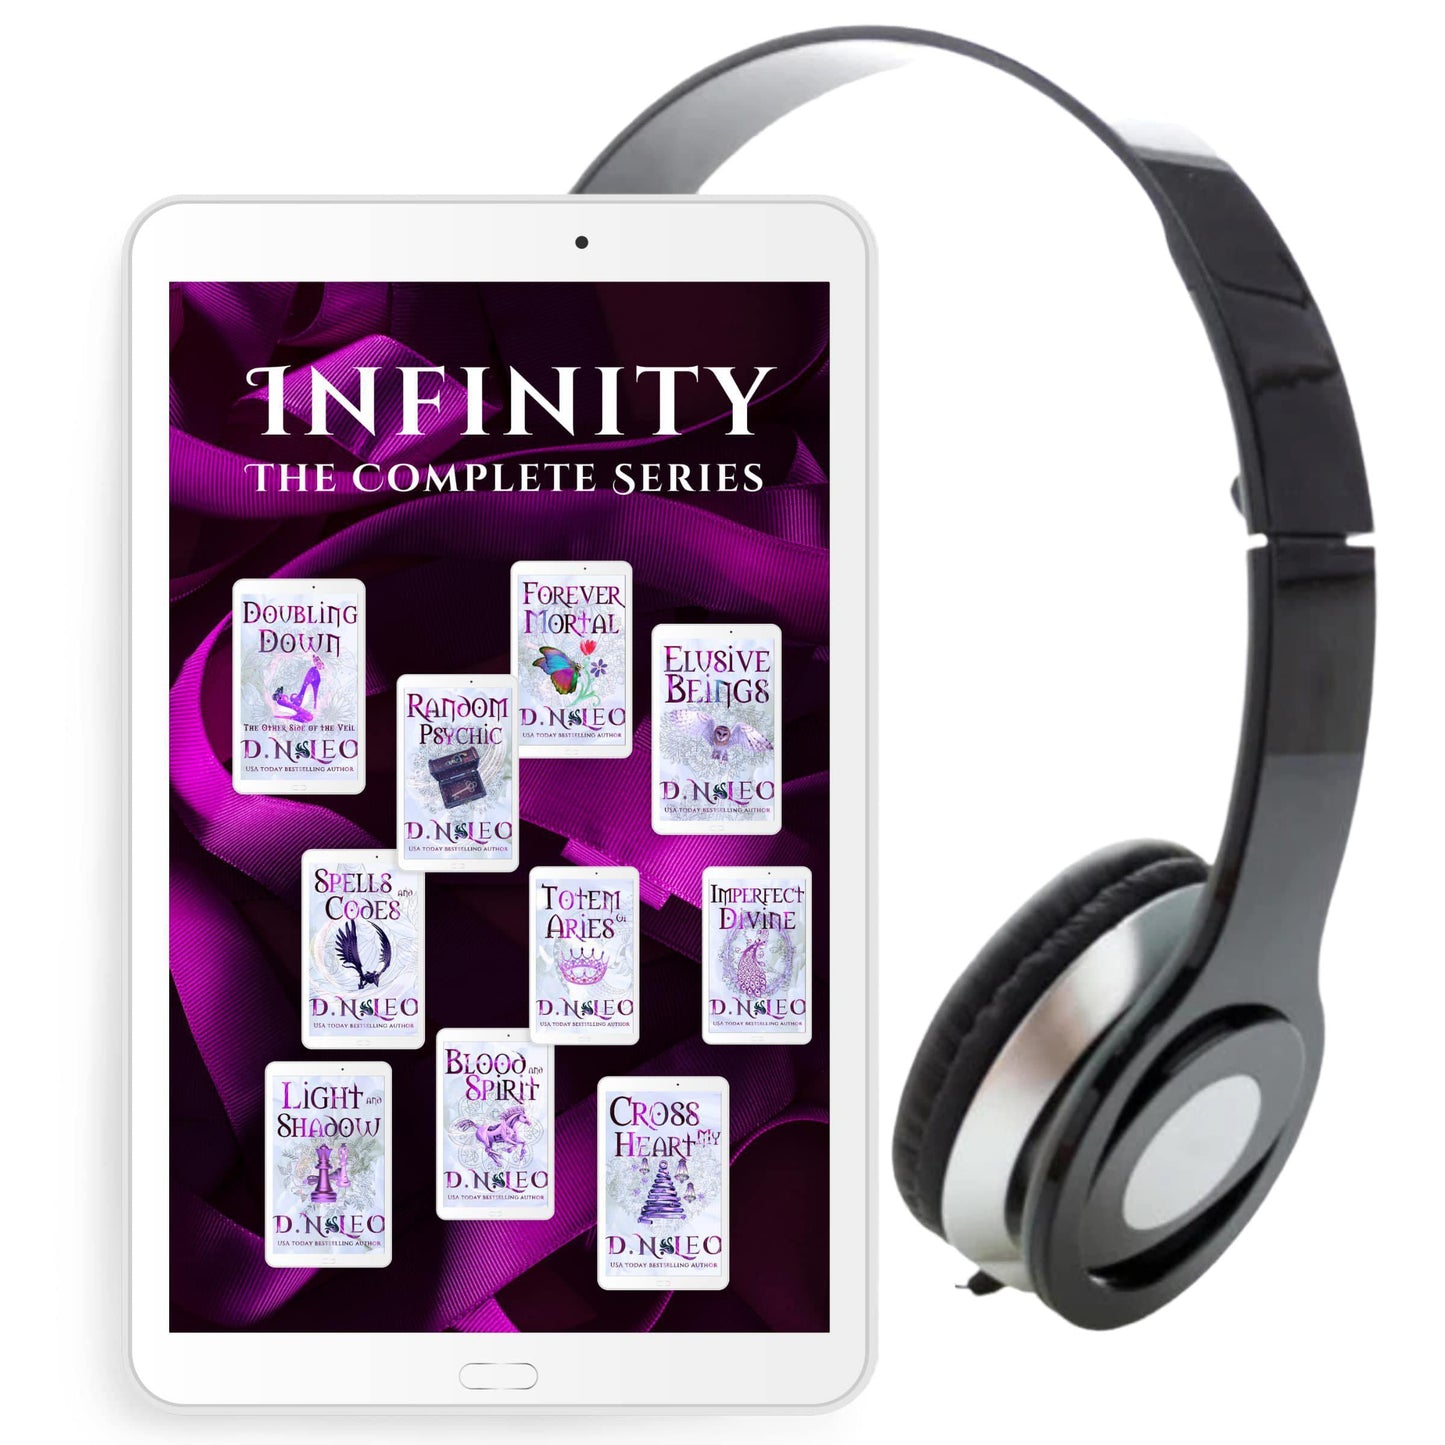 The Infinity - Audiobooks - Super Deal